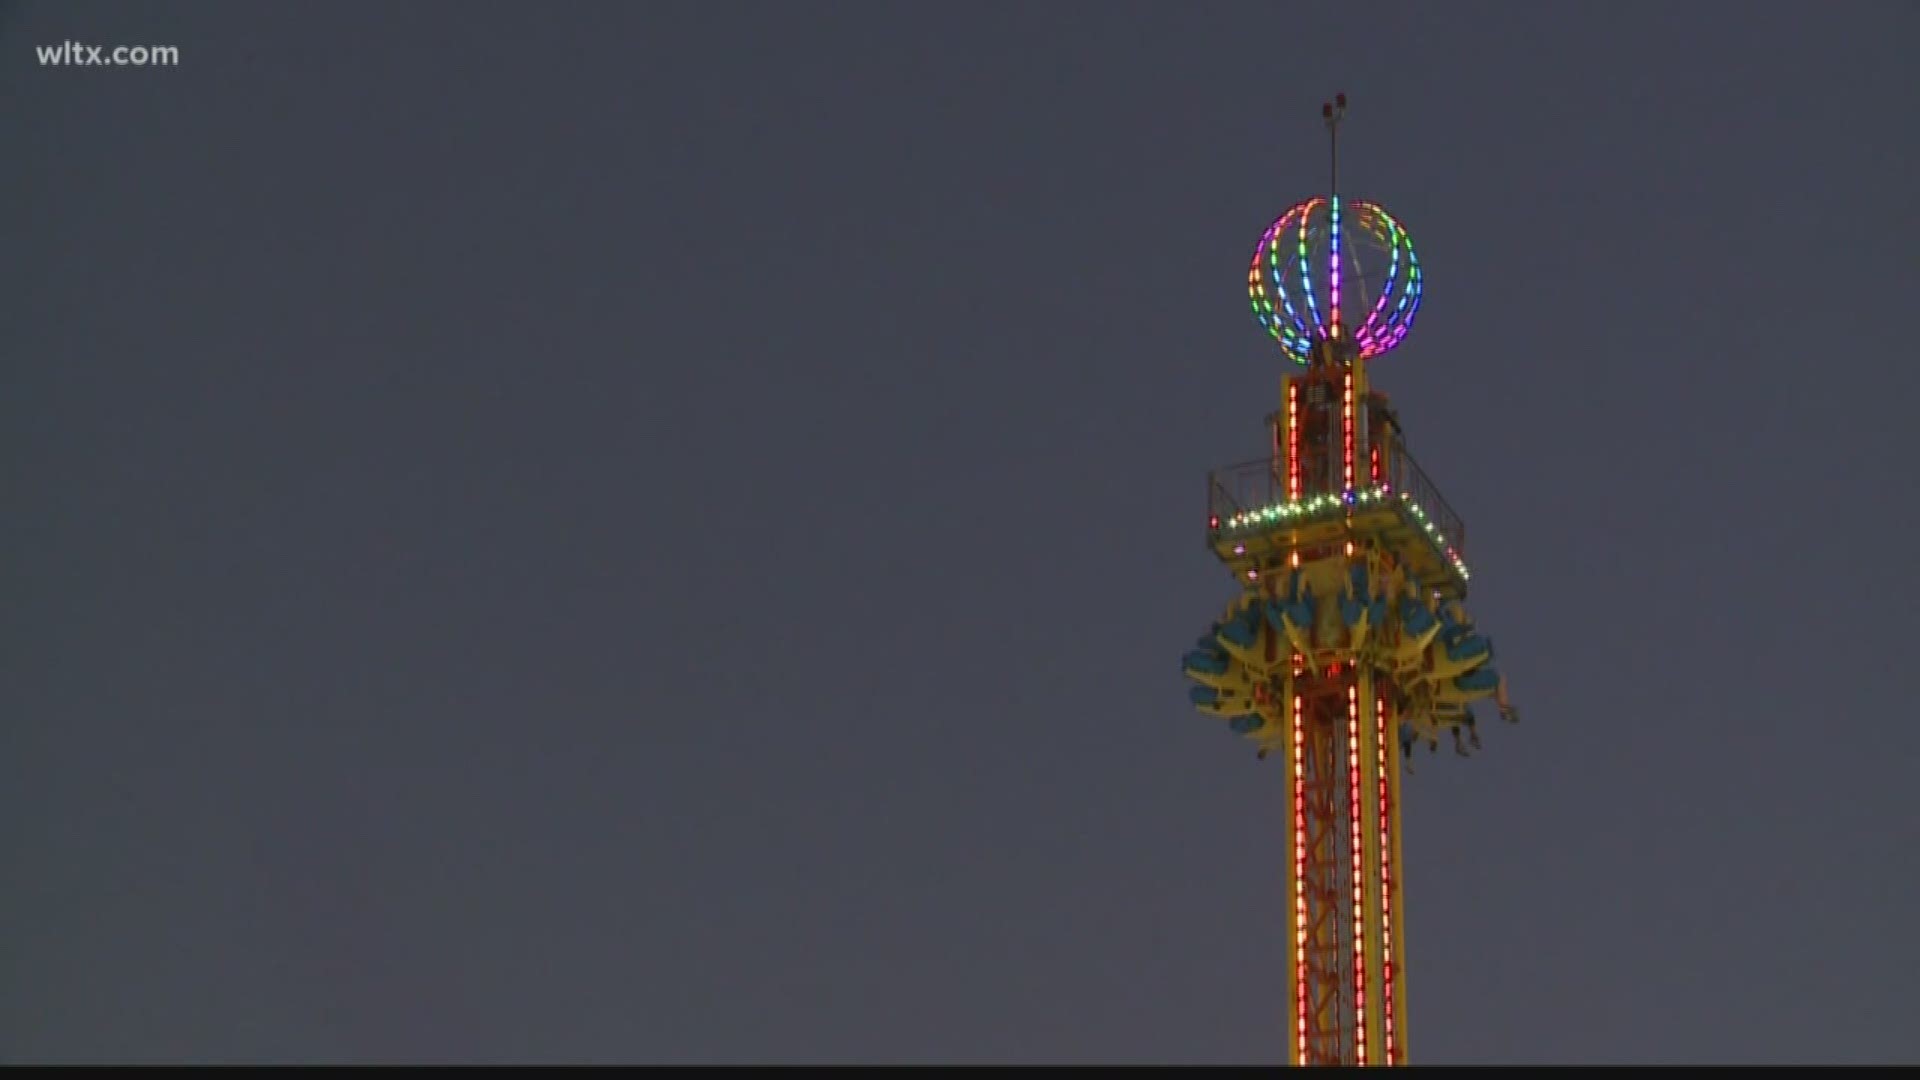 Darci Strickland breaks down the process behind keeping the South Carolina State Fair safe. The WLTX team will be at the fair to capture the sights and lights.